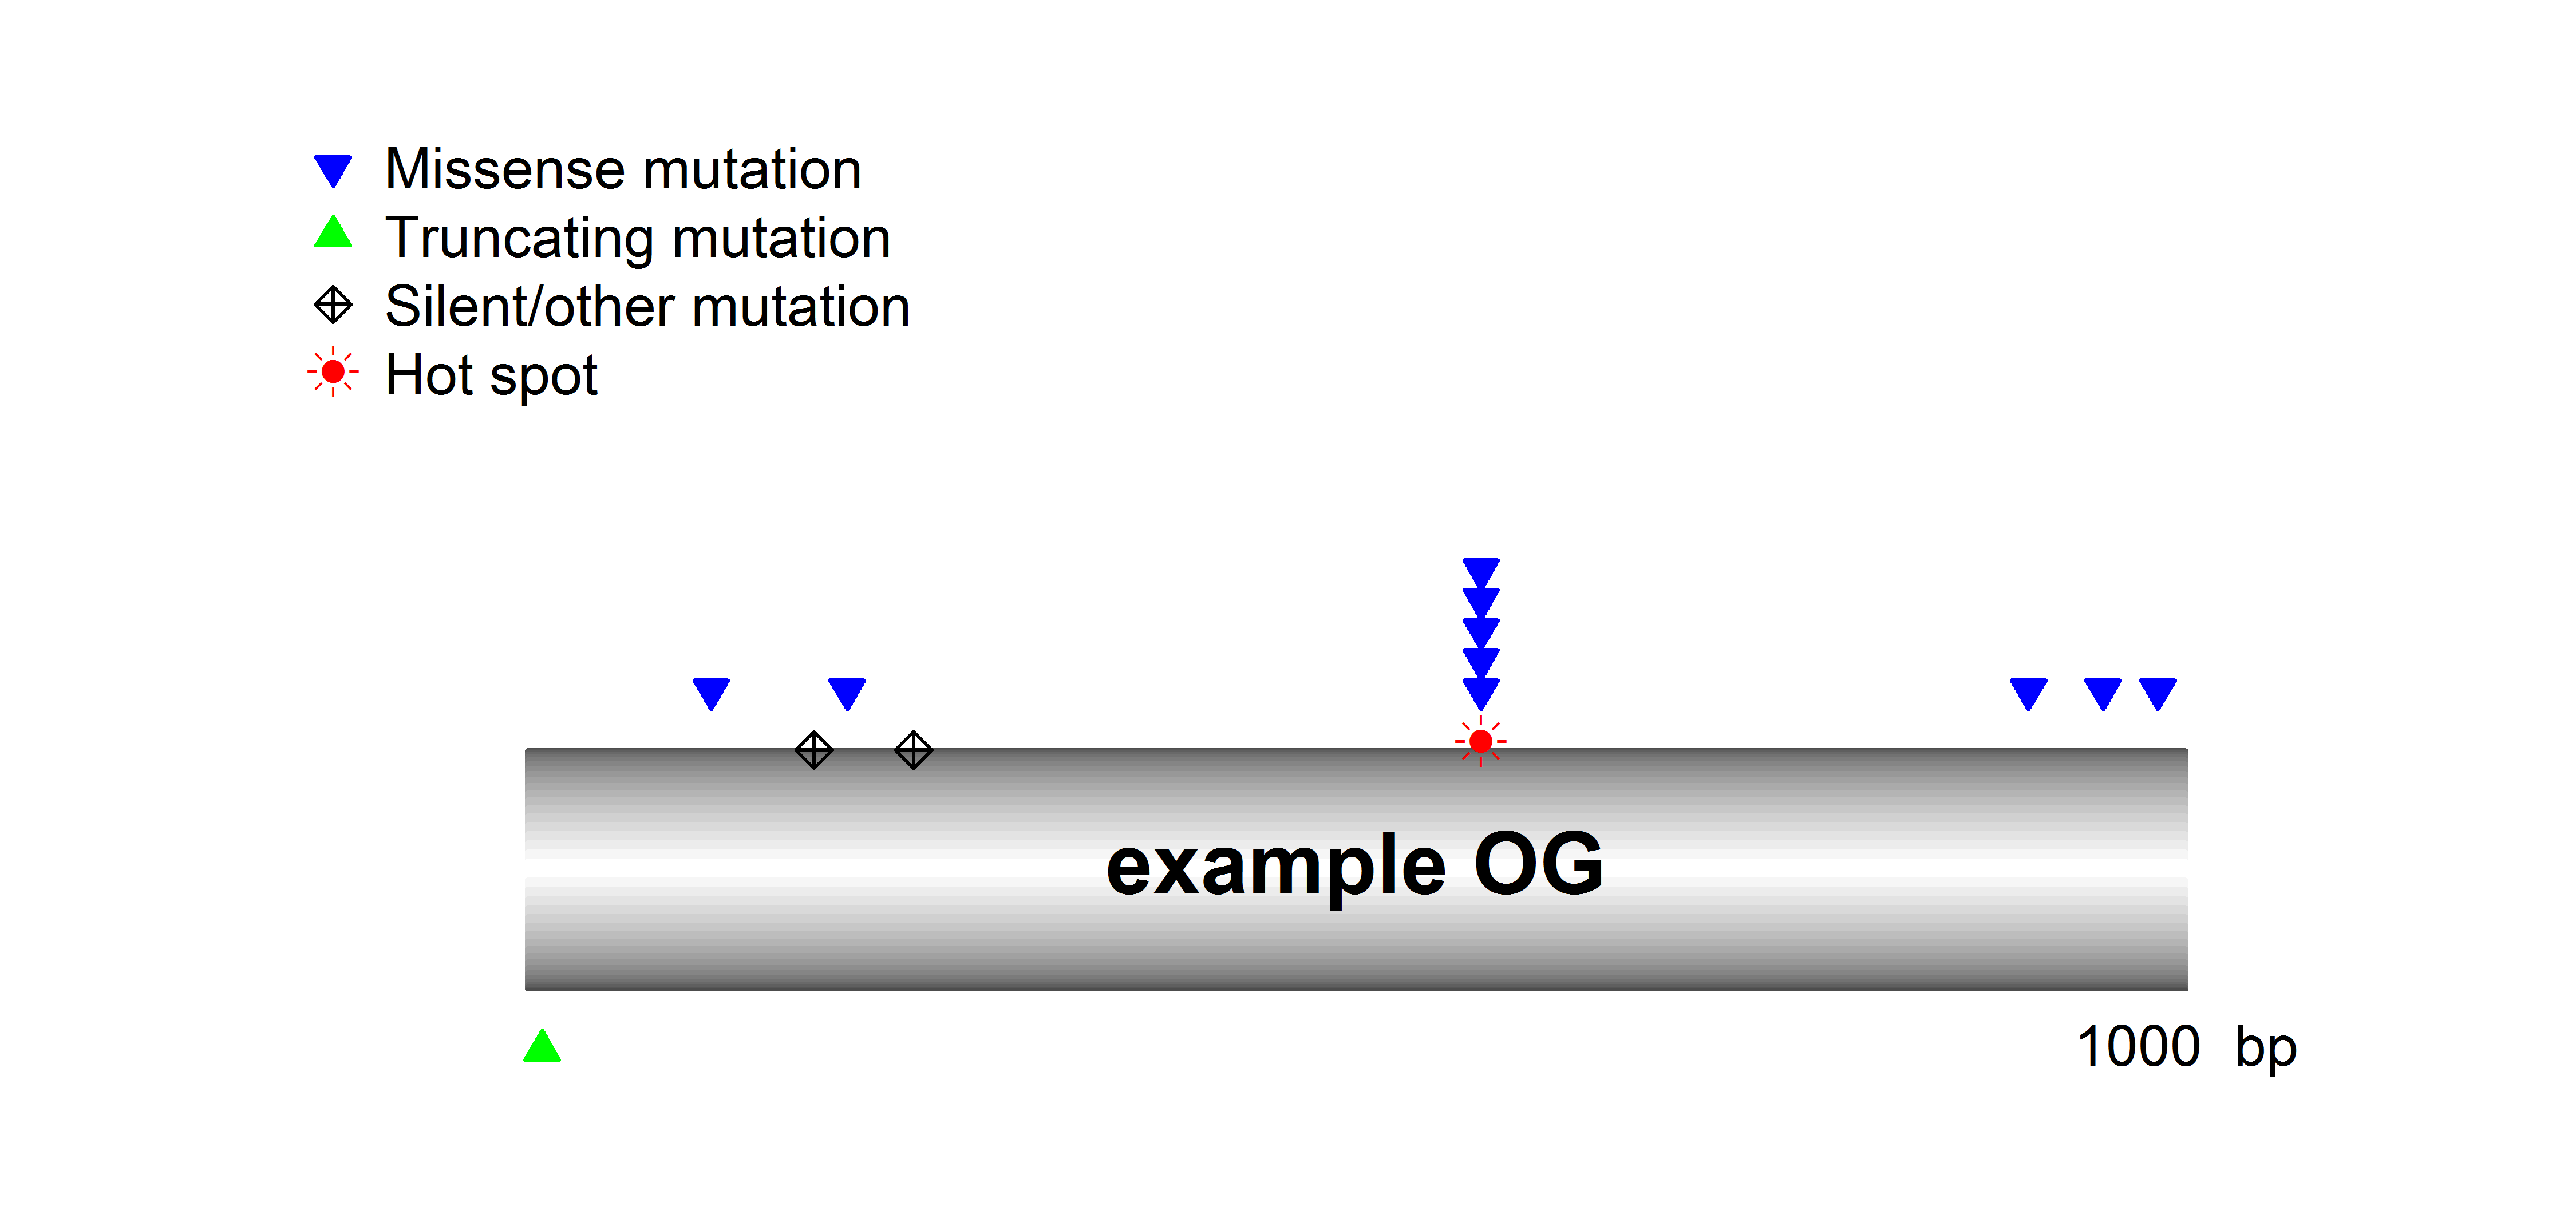 Example figure of the mutation pattern in an oncogene